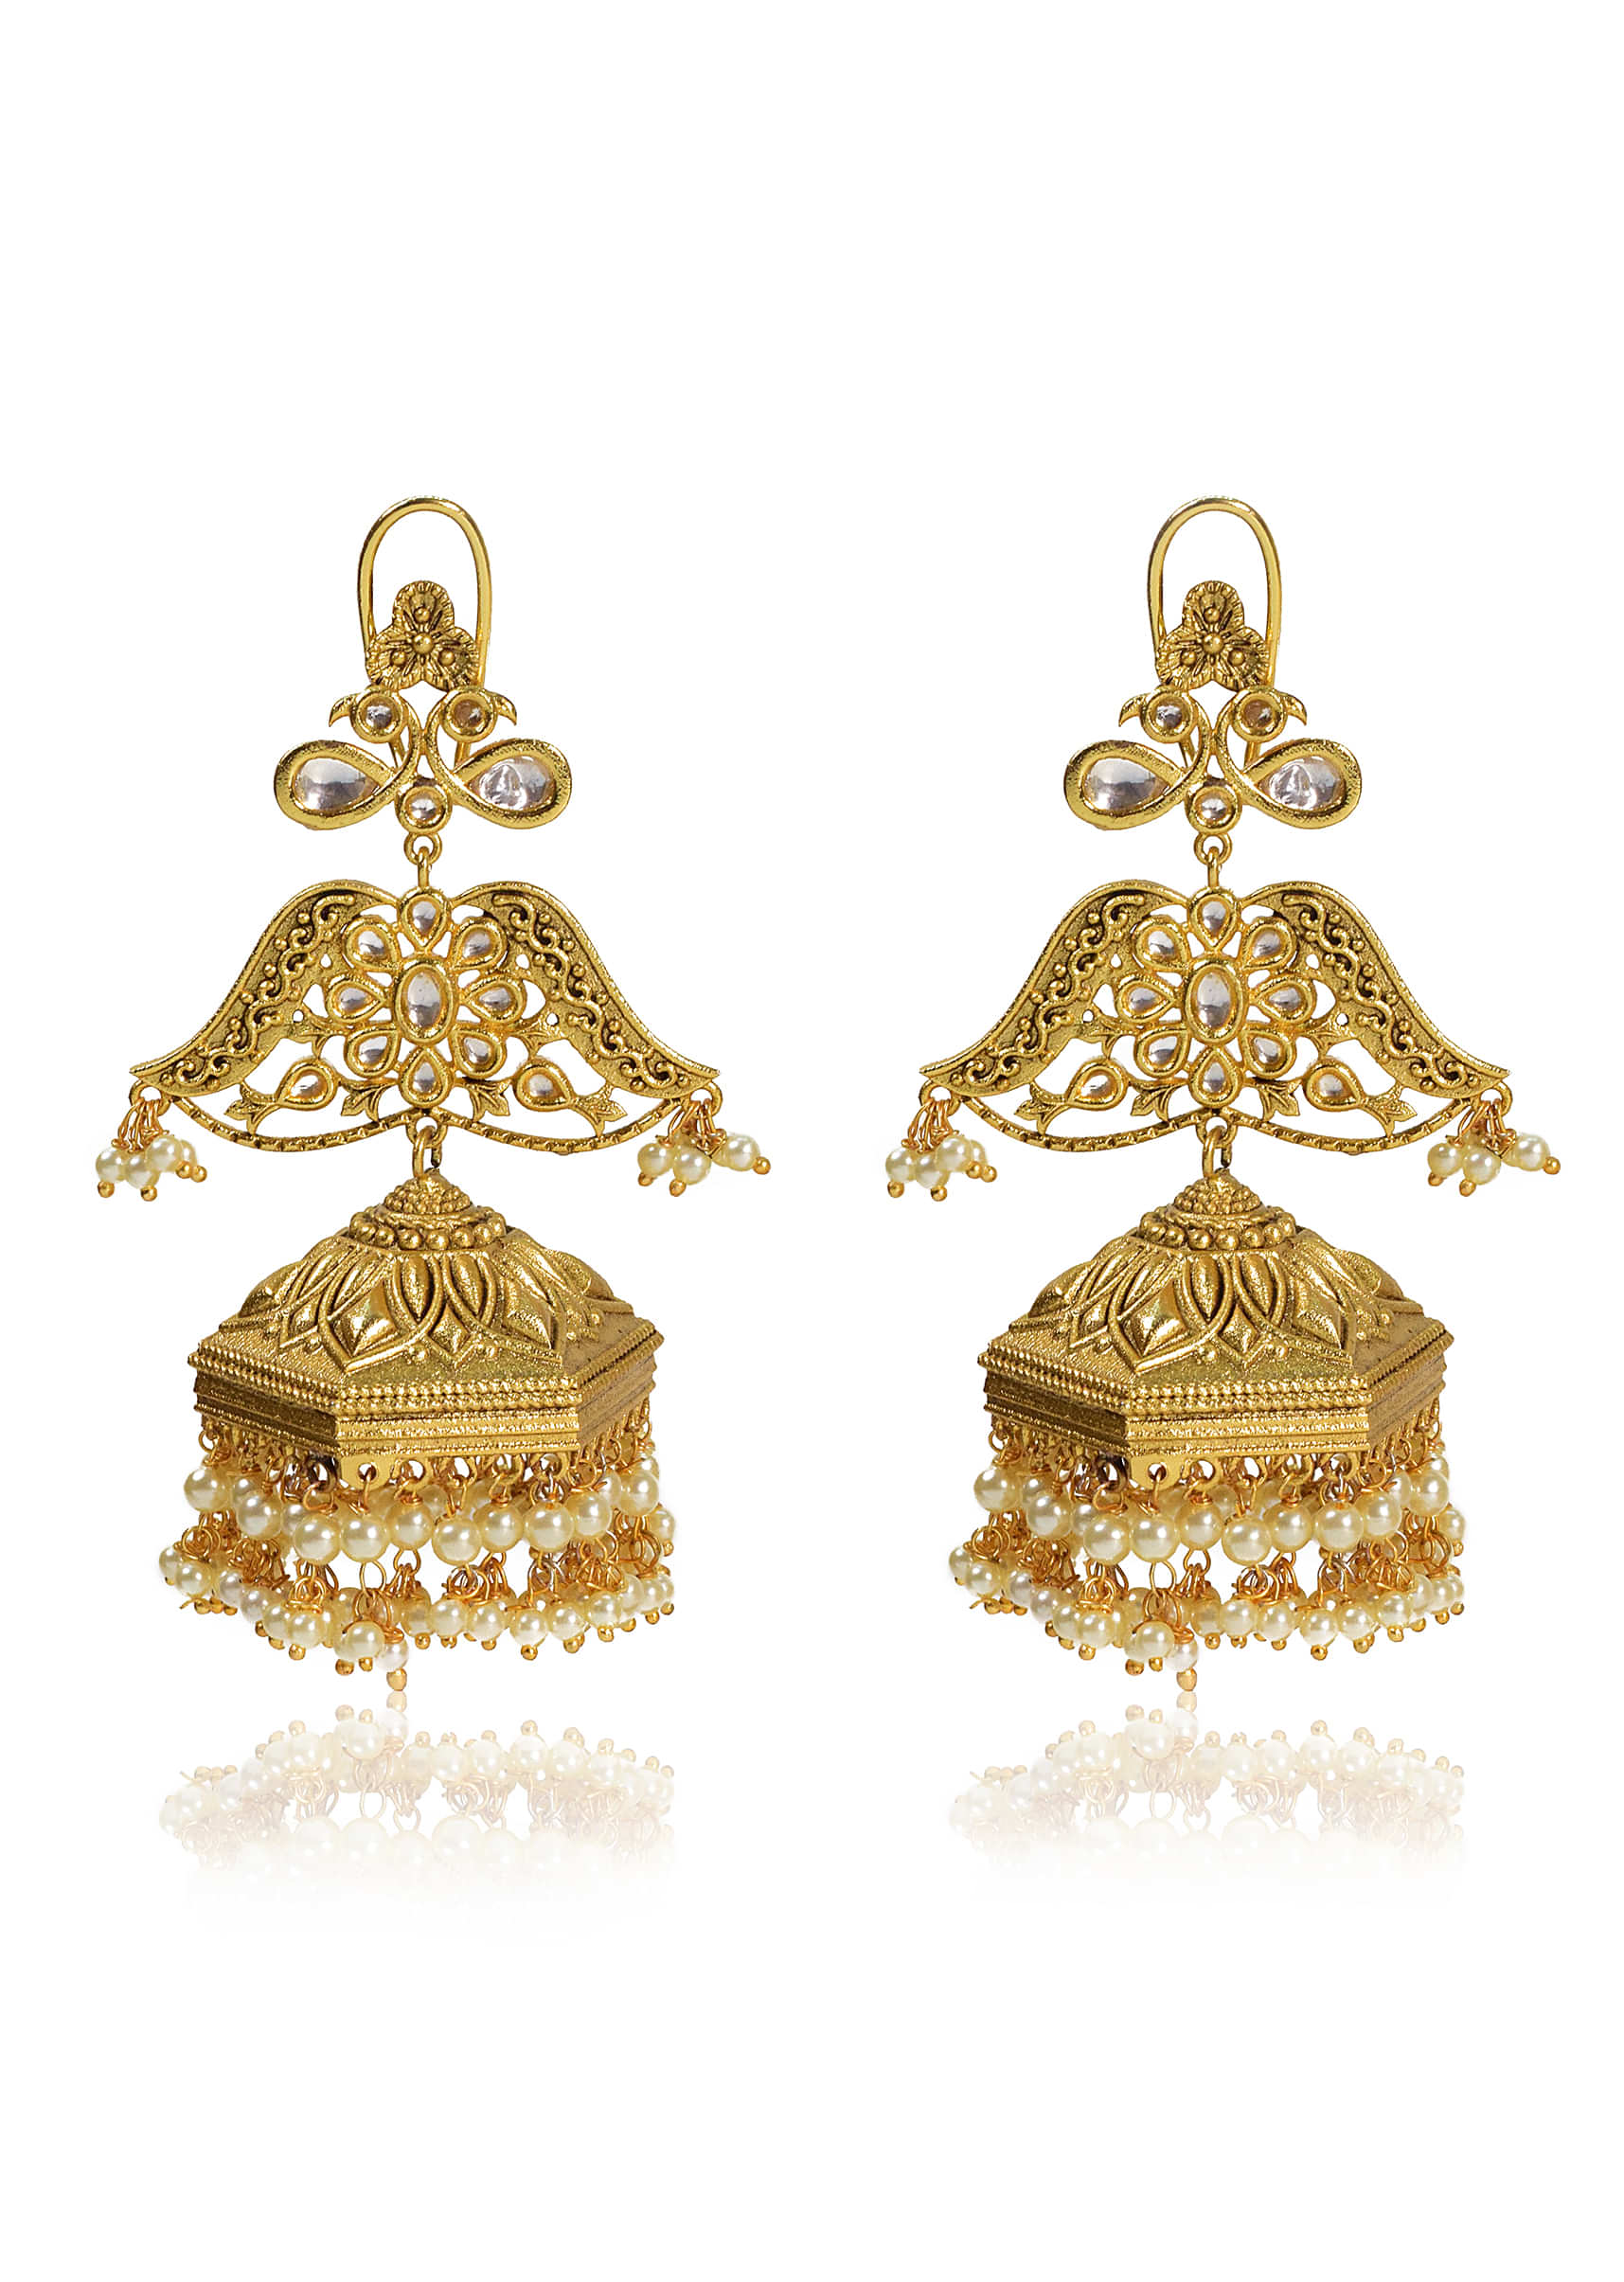 Antique Gold Ethnic Earrings Enhanced With Kundan  And Moti Fringes